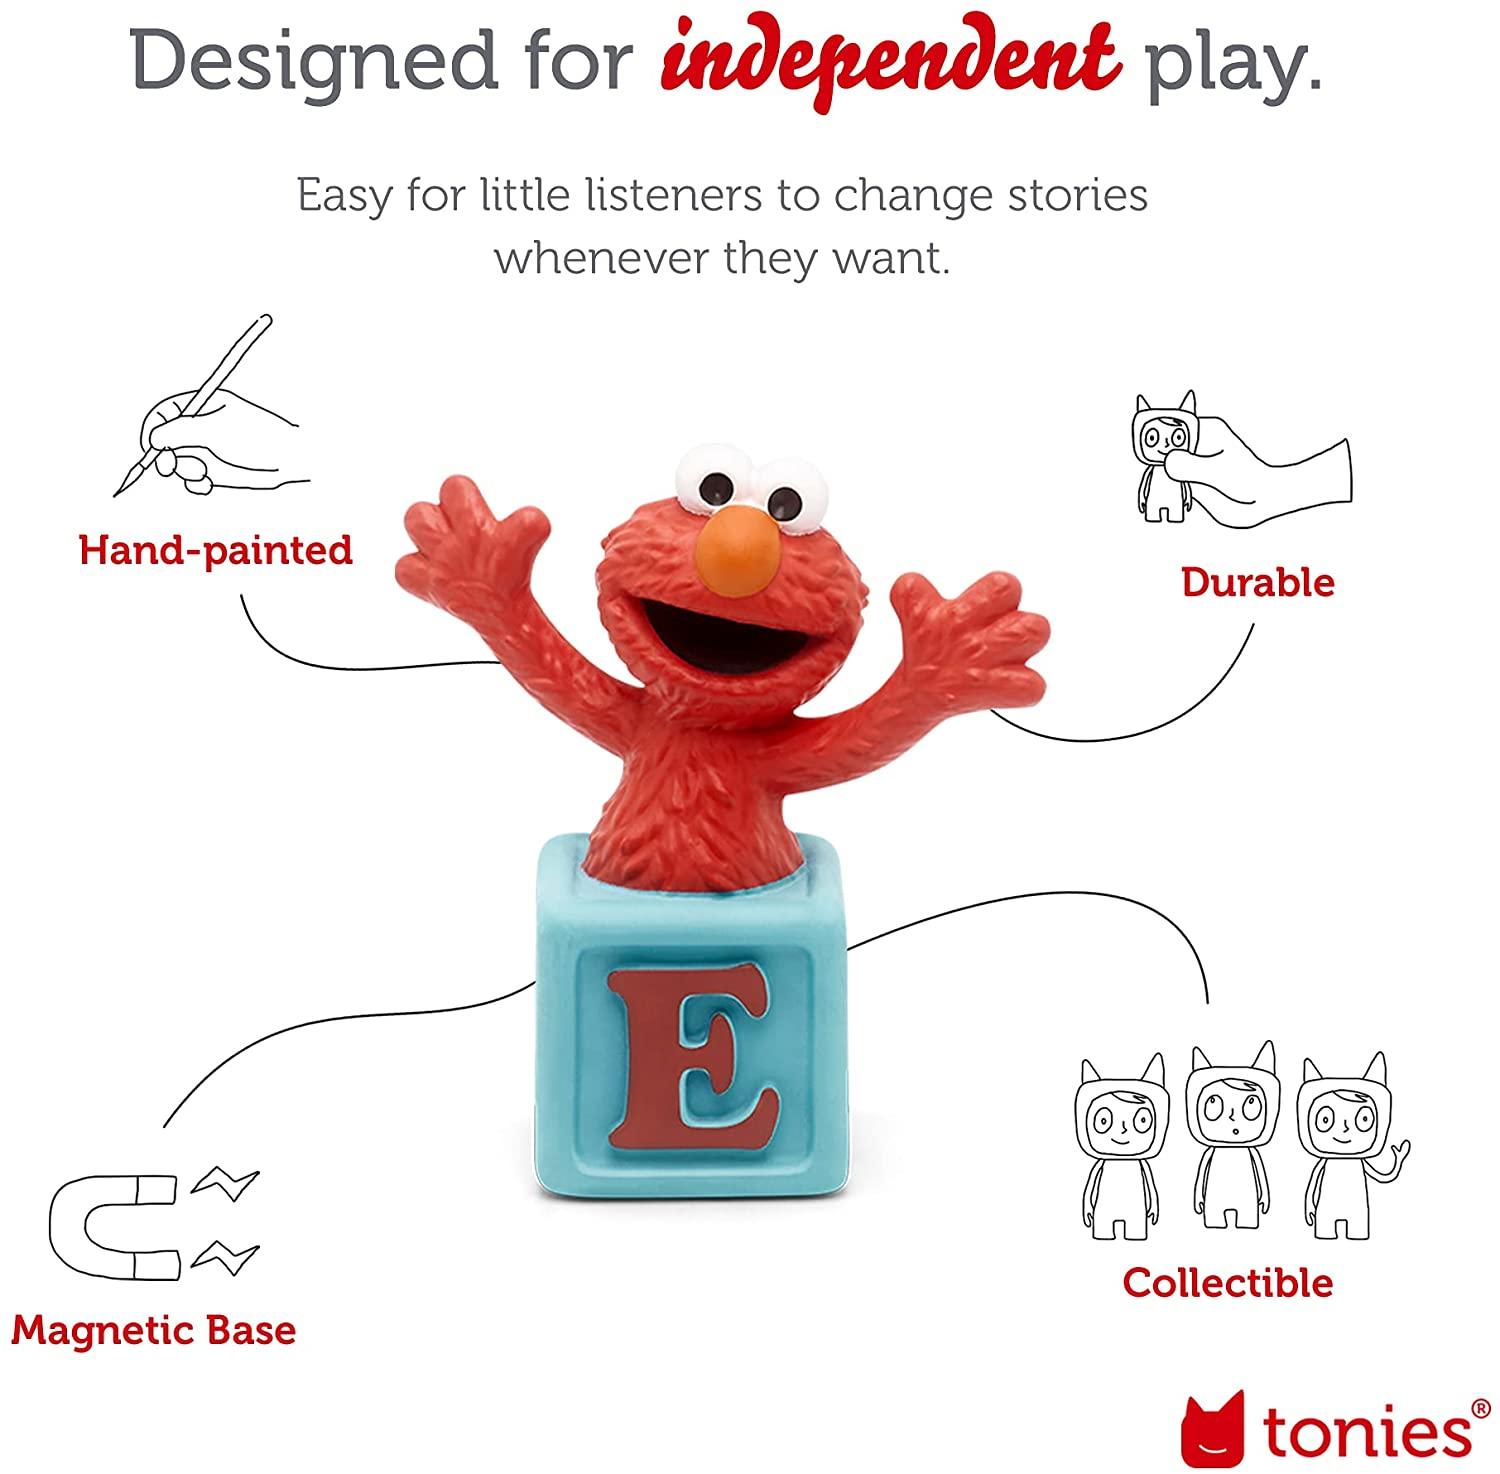 Illustration with Sesame Street Elmo figure showing how Tonies and Tonieboxes work.